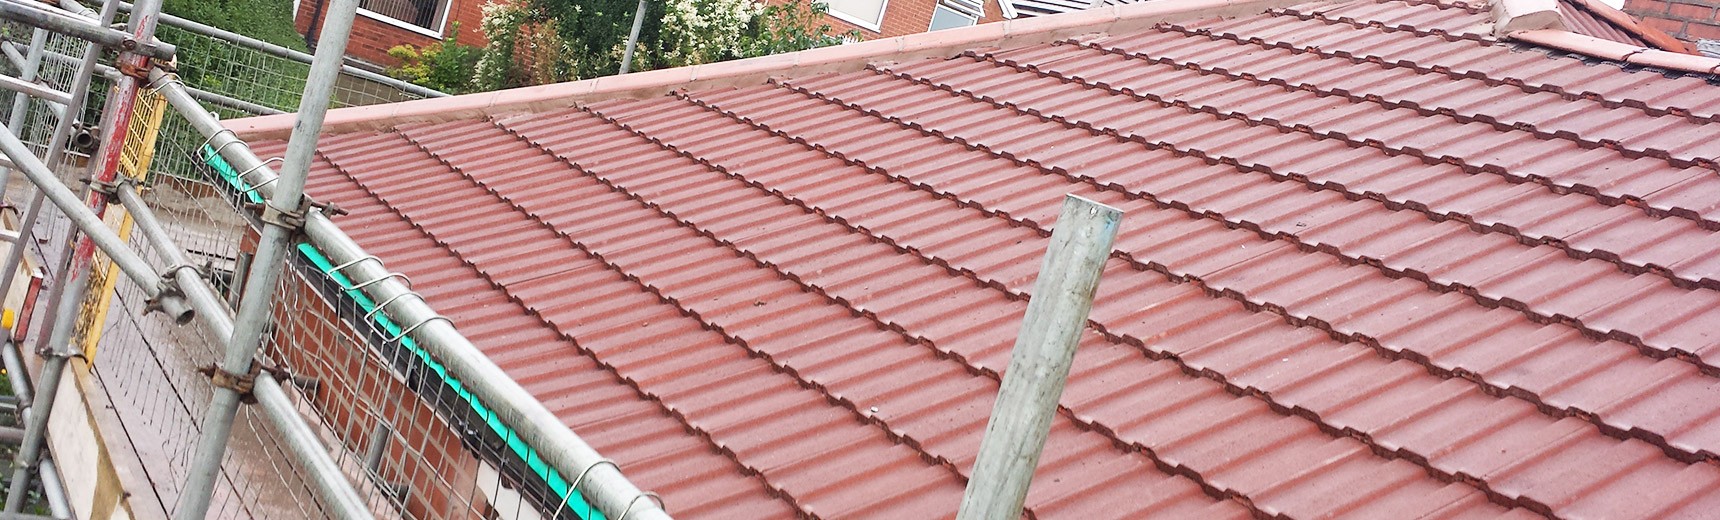 Roofing tiles being fitted